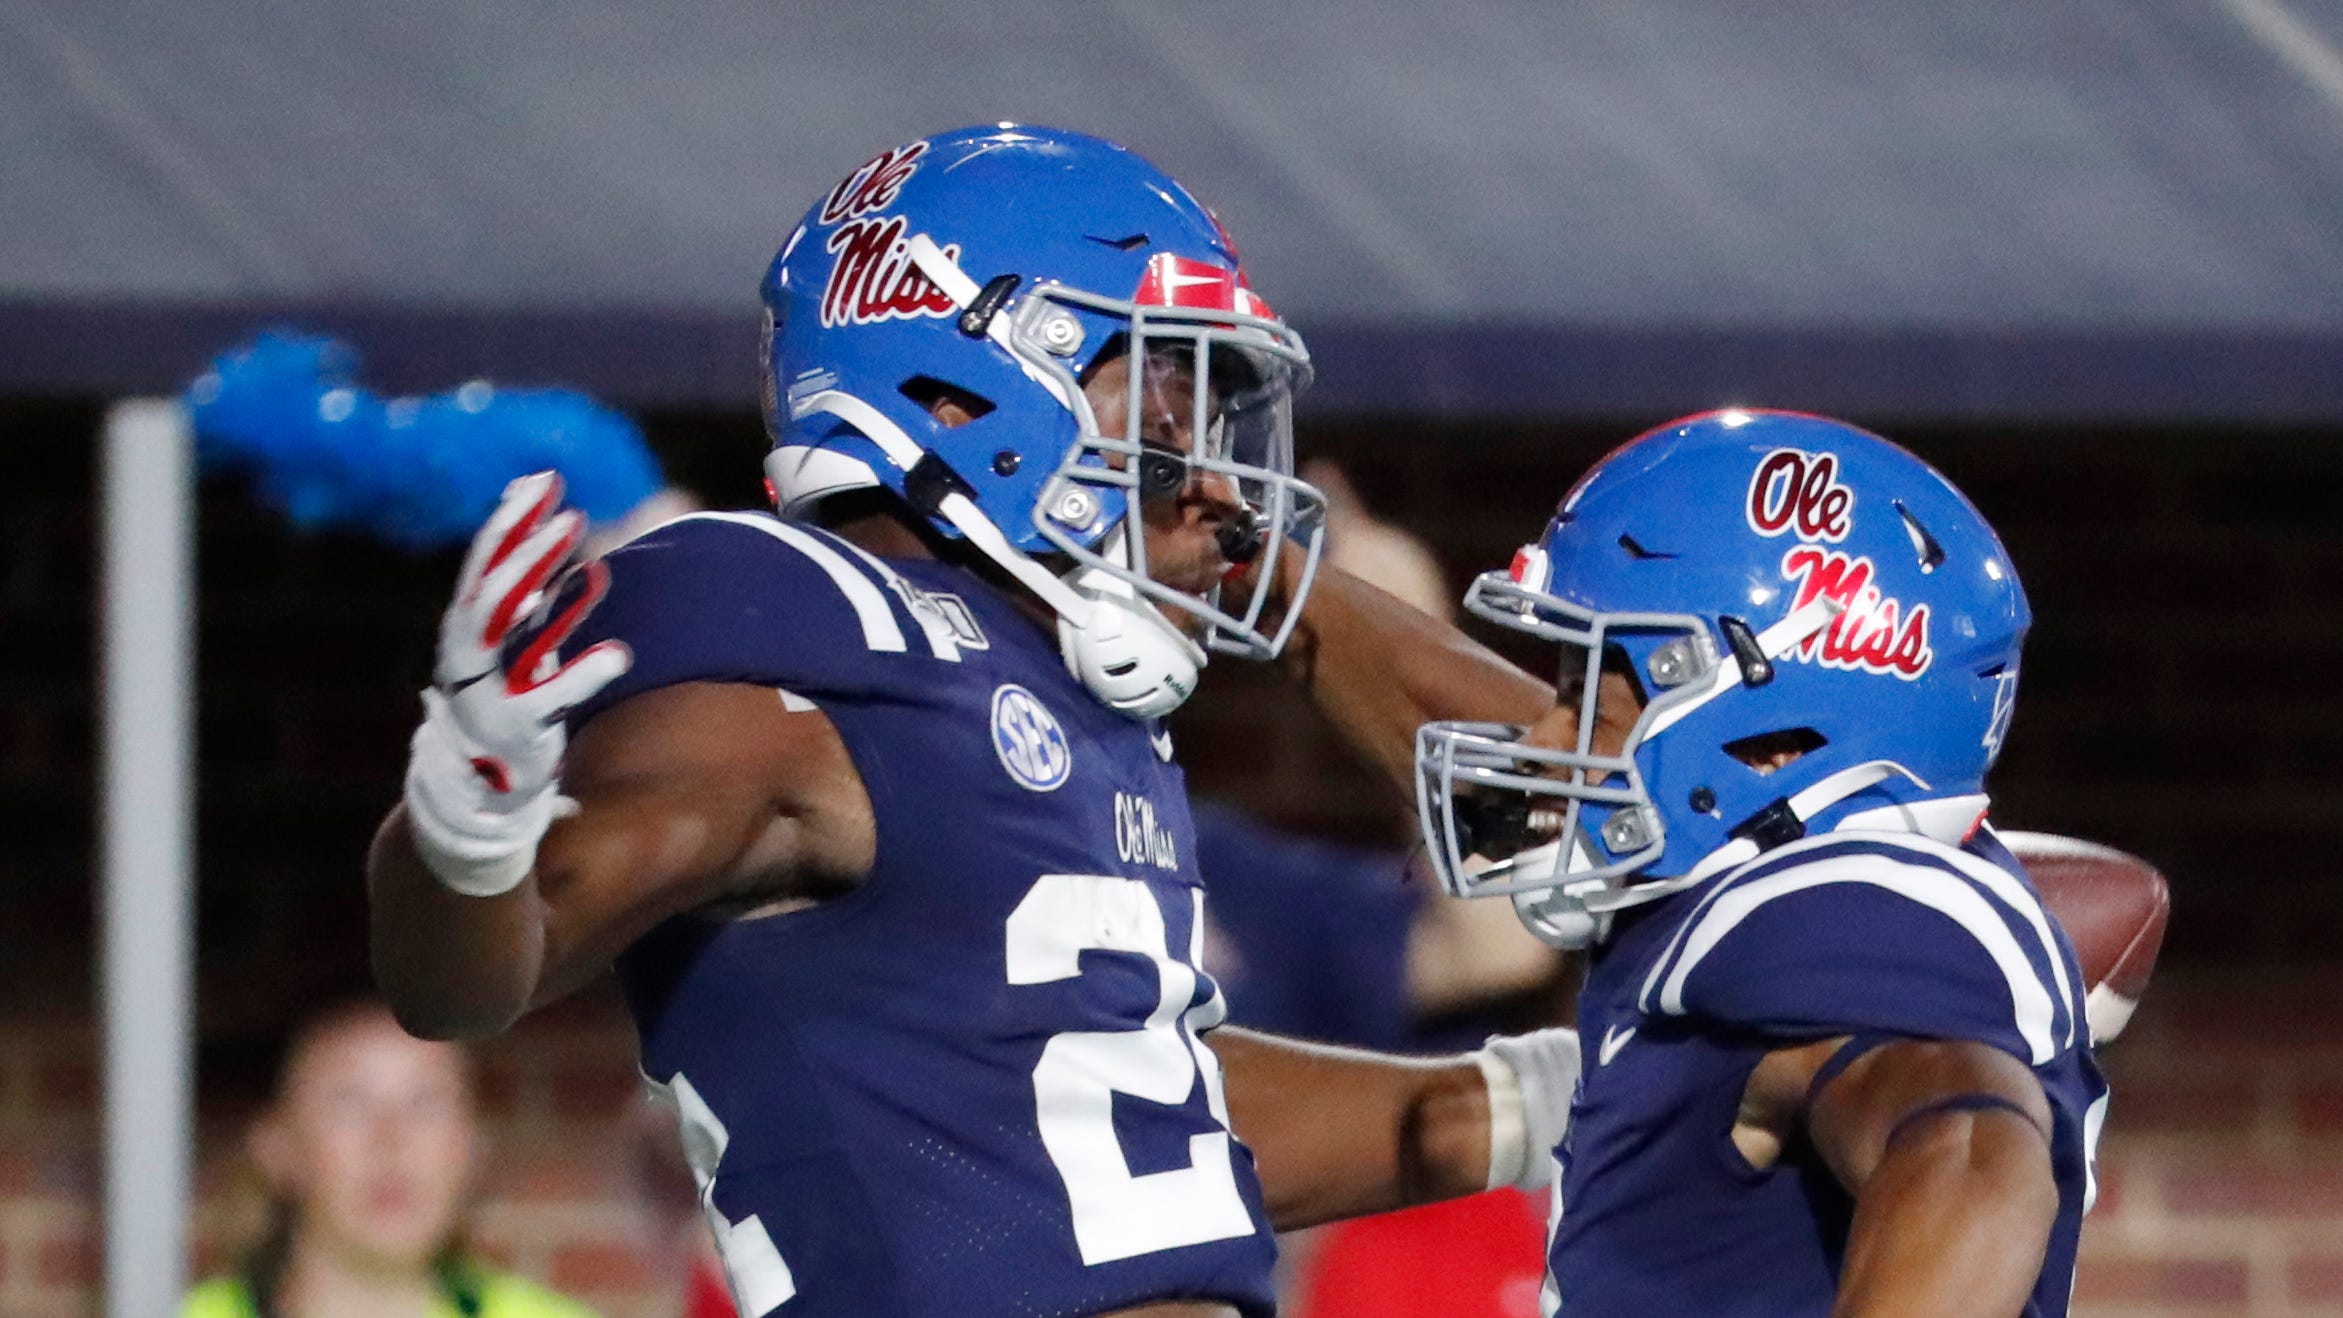 Ole Miss football adds two SEC East opponents to 2020 schedule